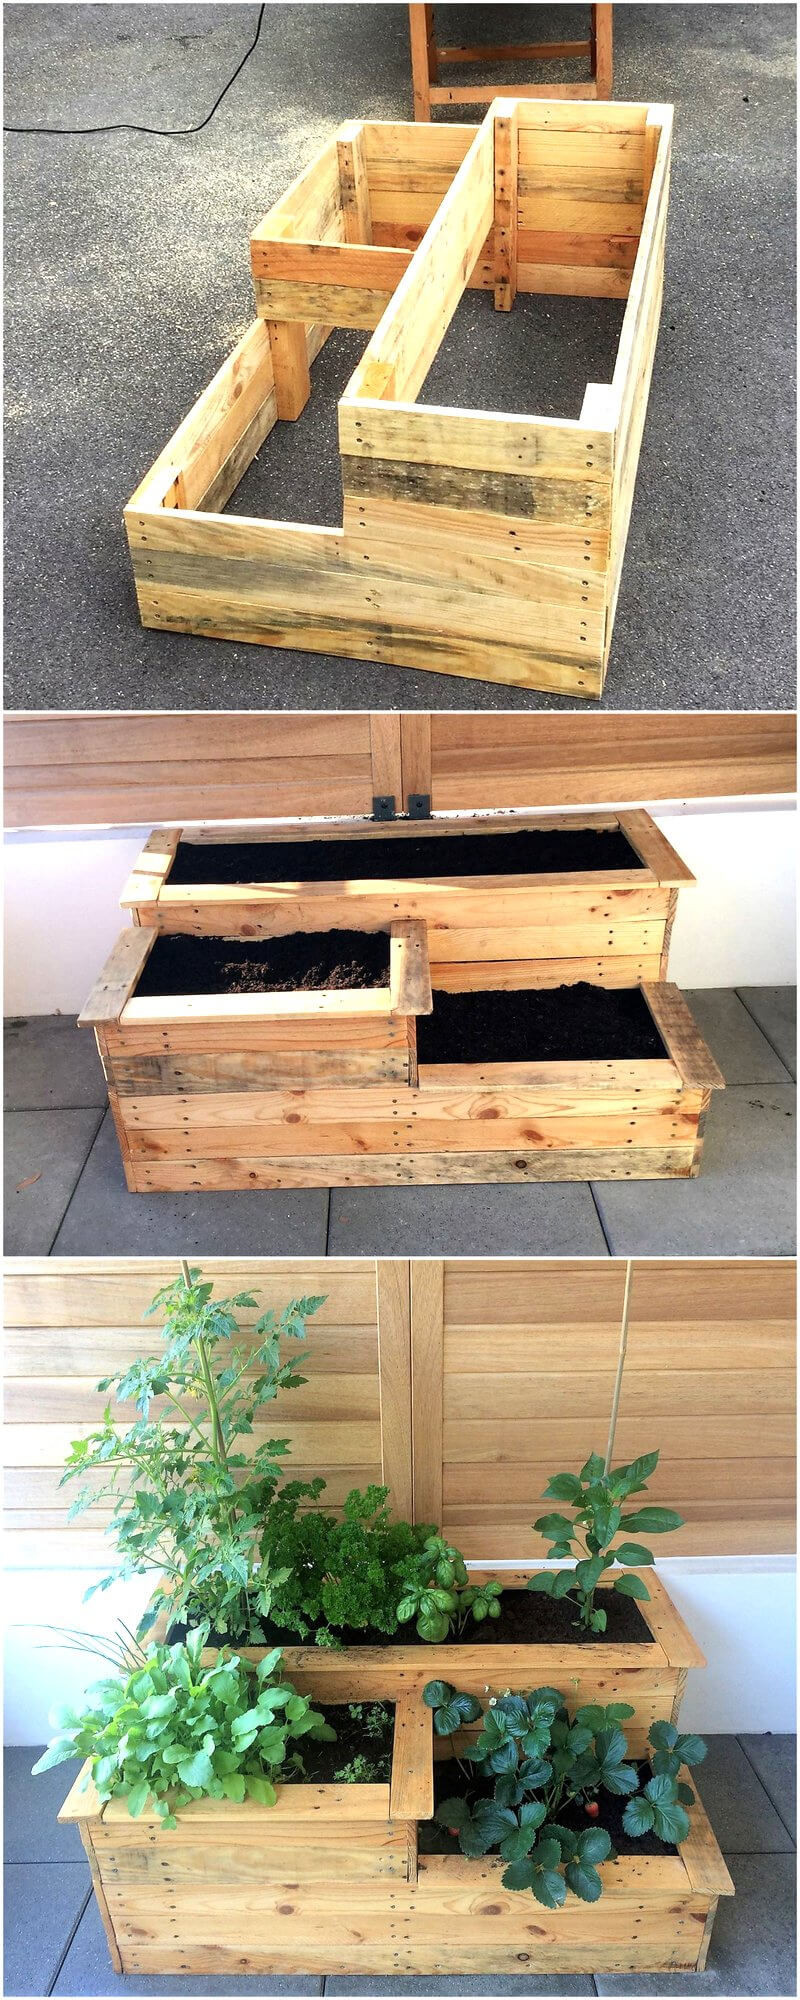 DIY With Wood Pallets
 Repurposing Plans for Shipping Wood Pallets